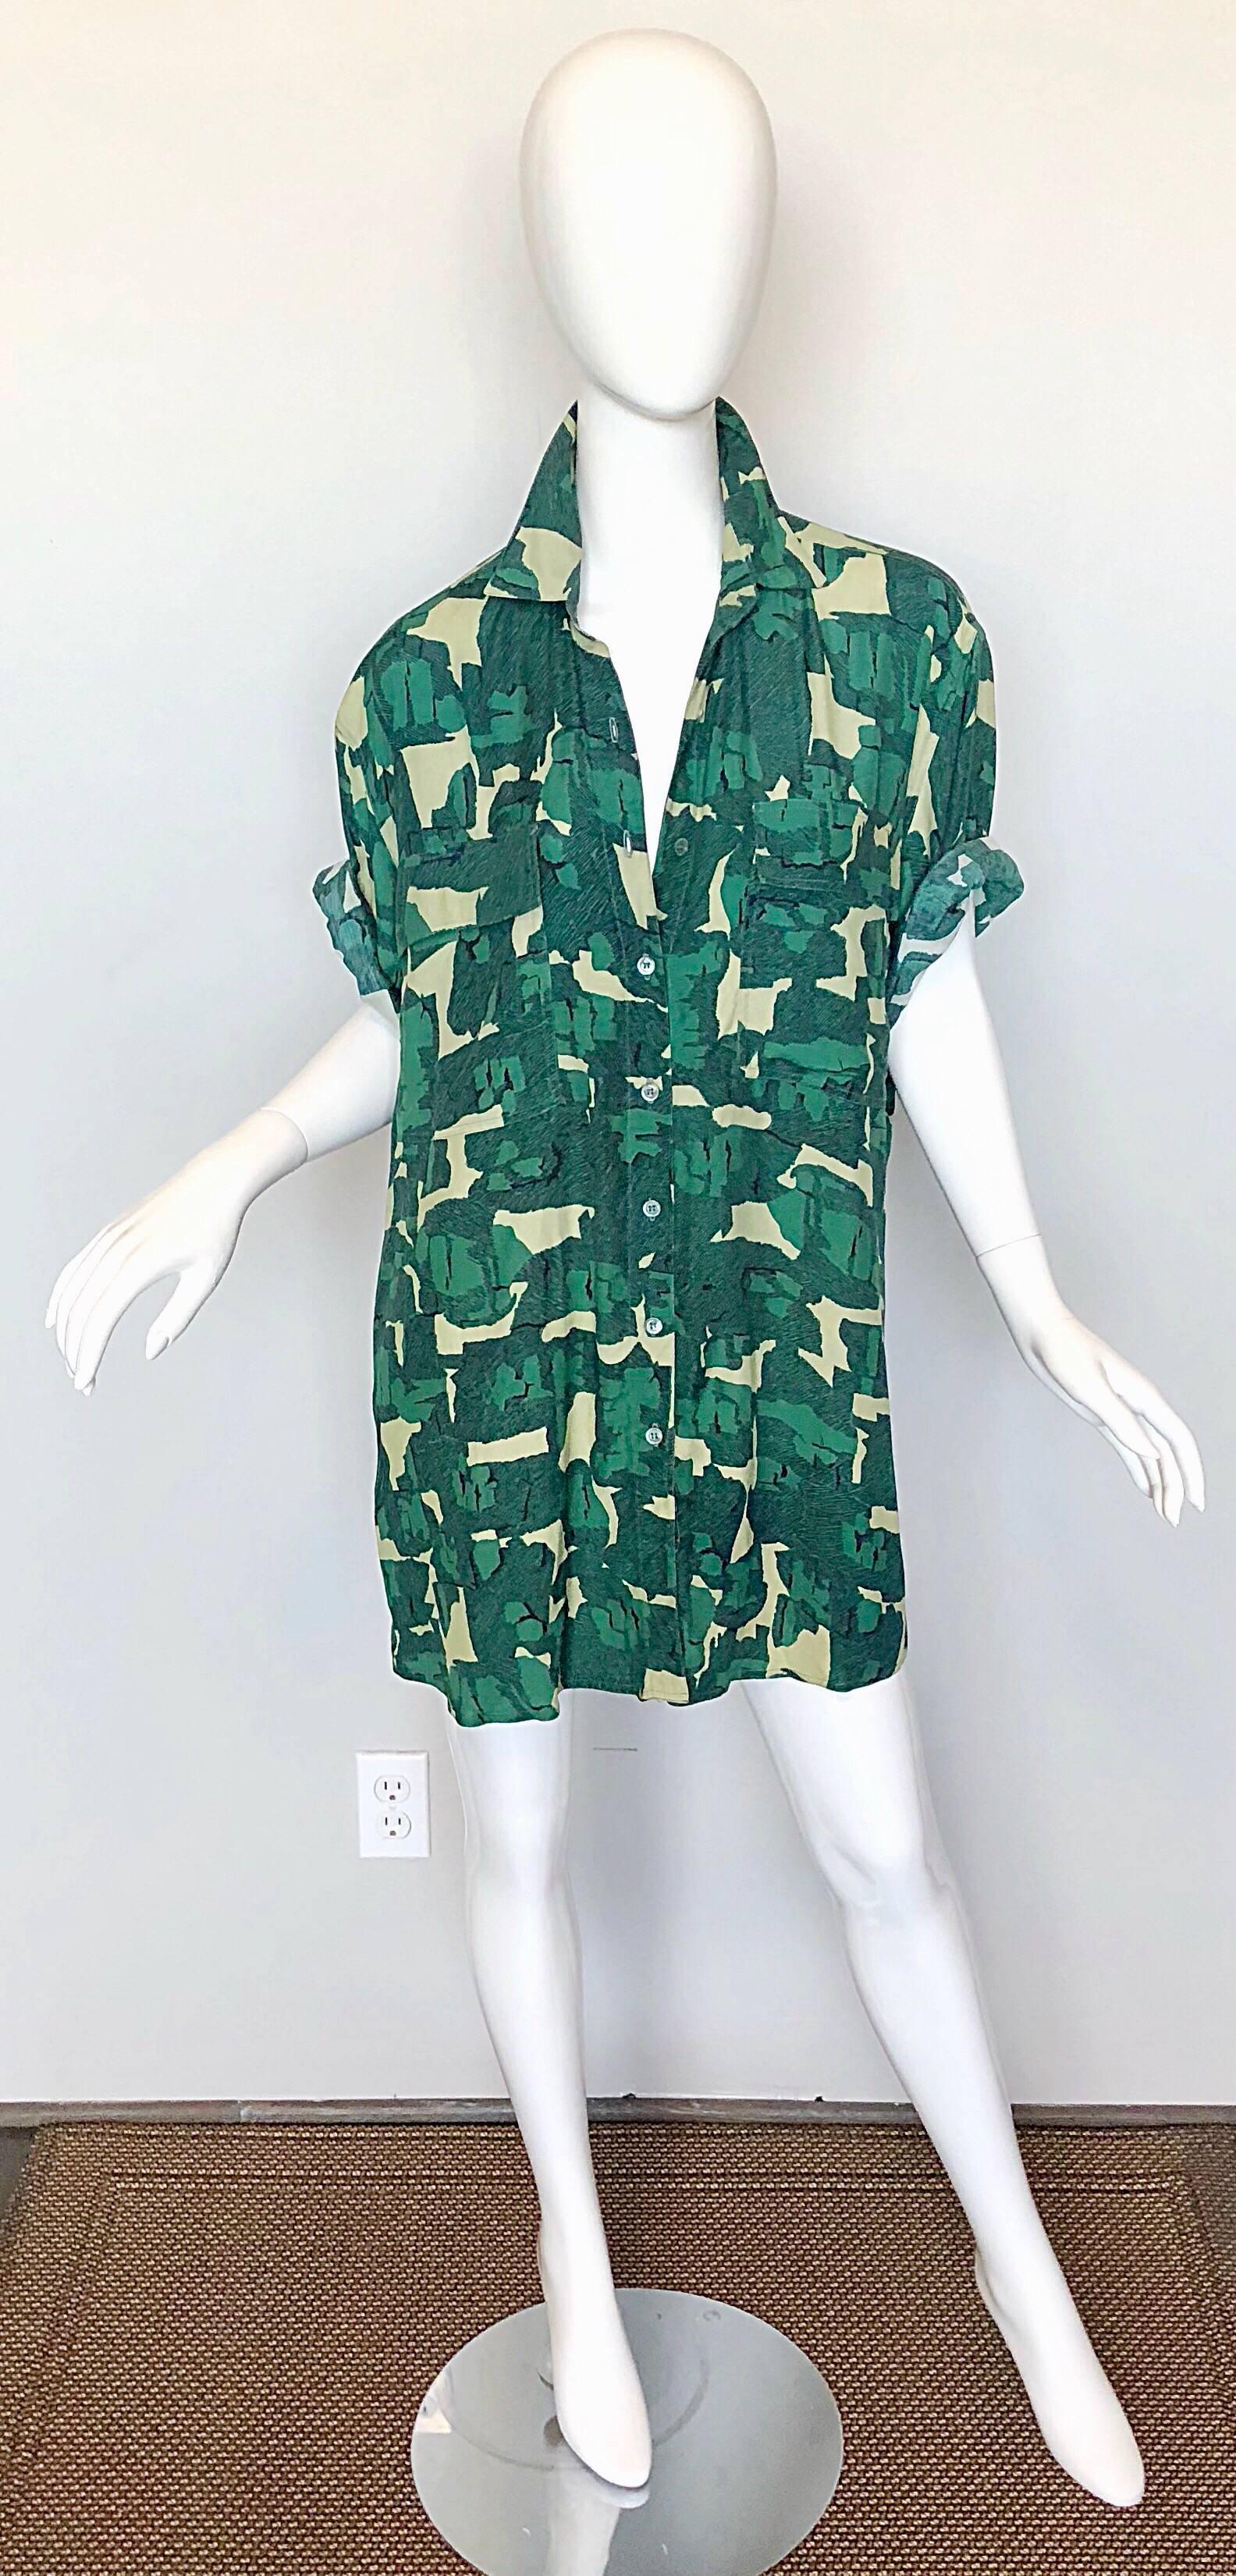 Amazing and rare 1980s AZZEDINE ALAIA oversized slouchy camo print rayon shirt dress! Features an easy to wear versatile baggy fit that is surprising sexy and flattering. Can be worn as either a shirt or dress, belted or alone. Buttons up the front